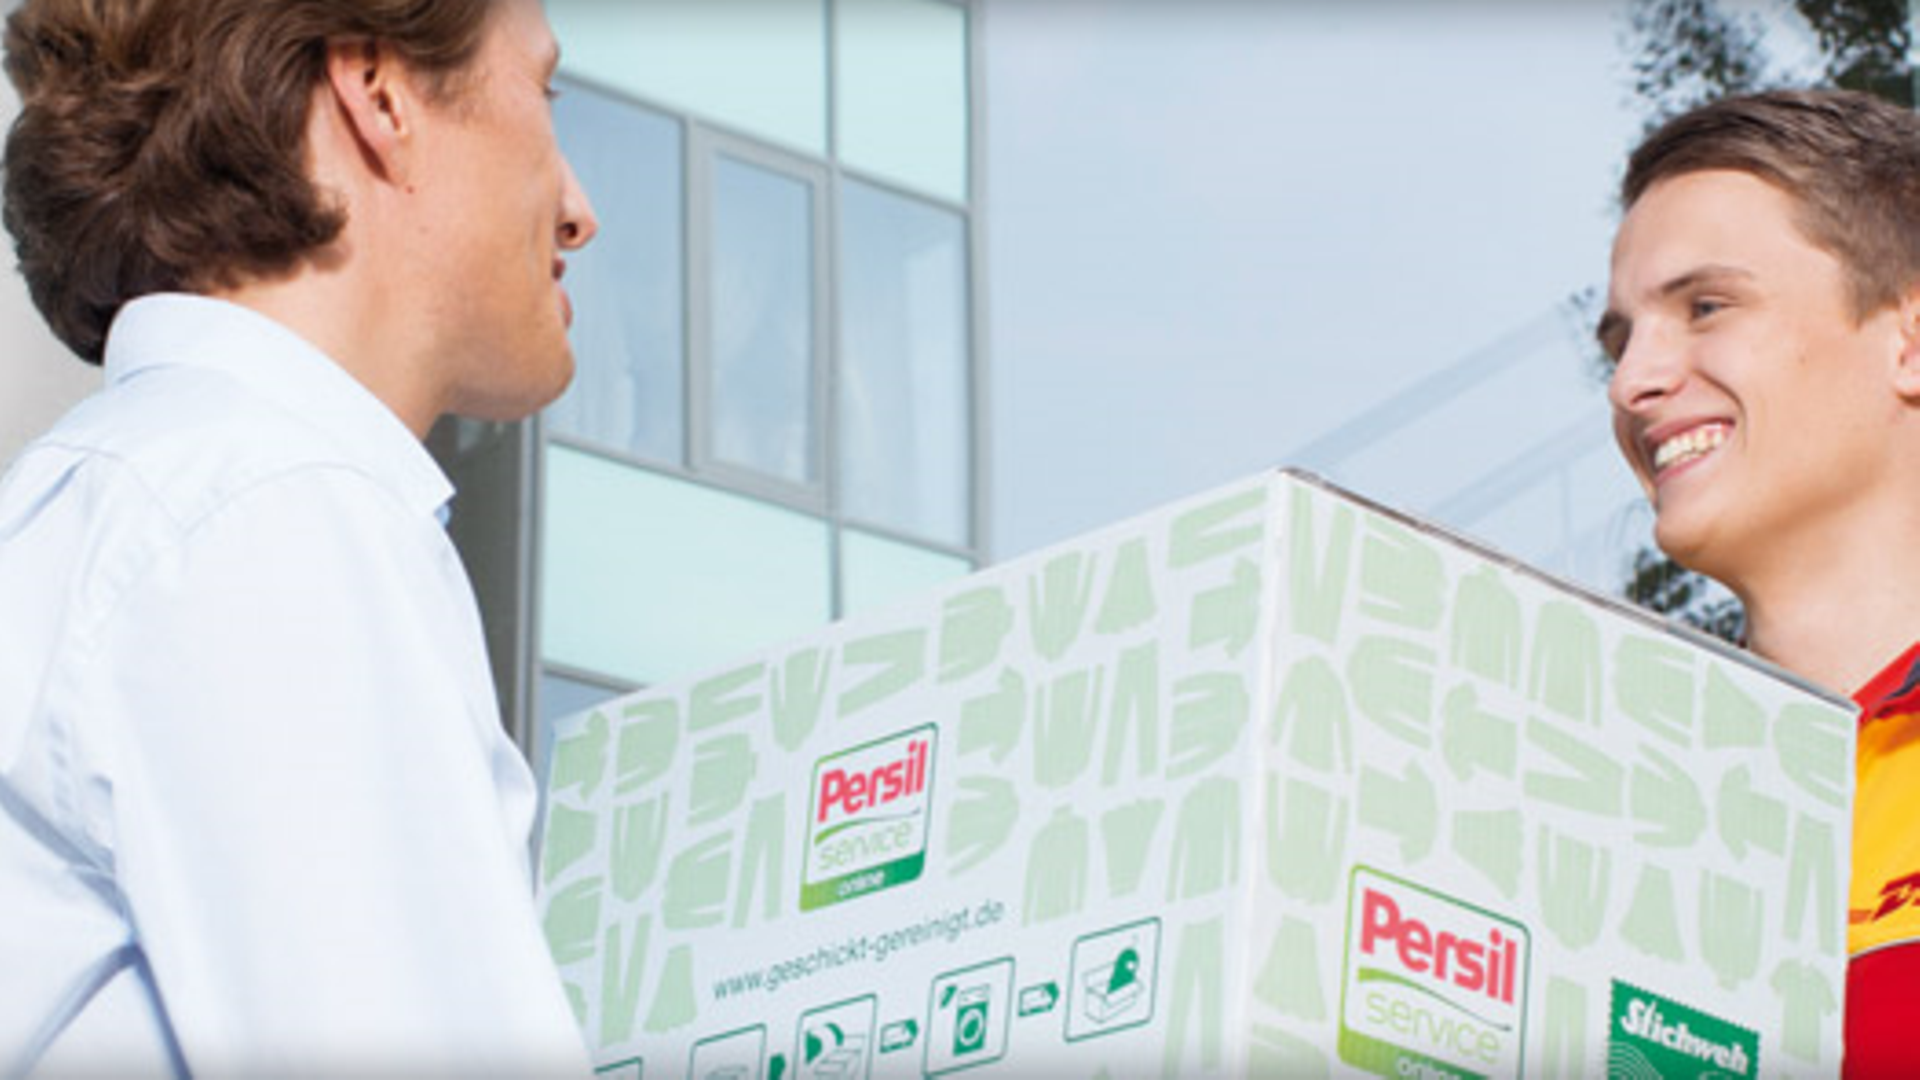 Persil Service Online